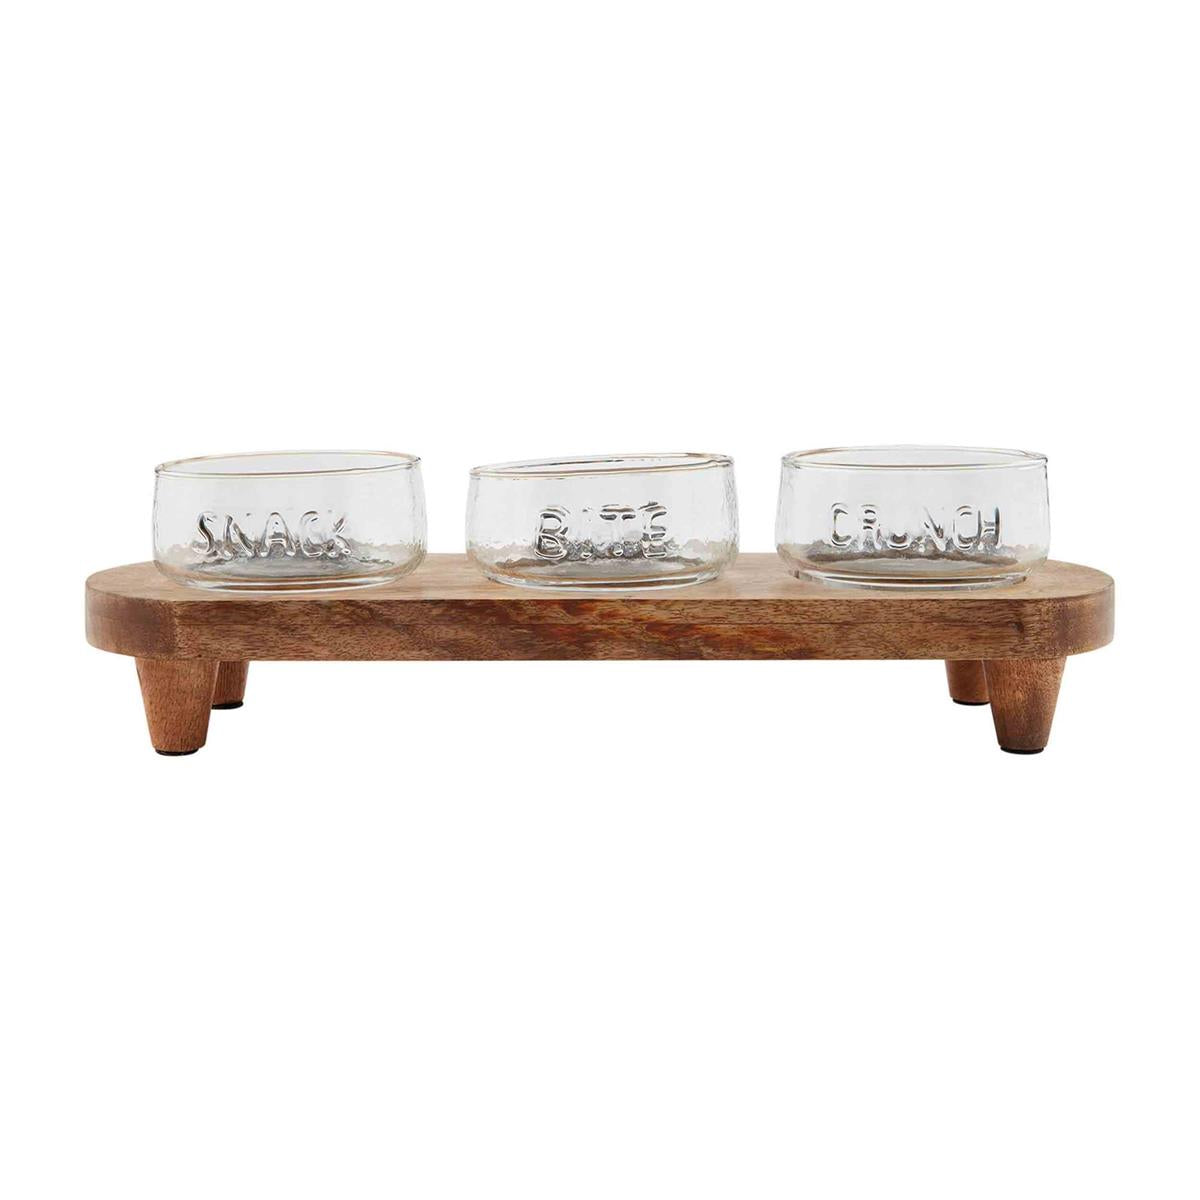 Snack Bowl & Stand Set